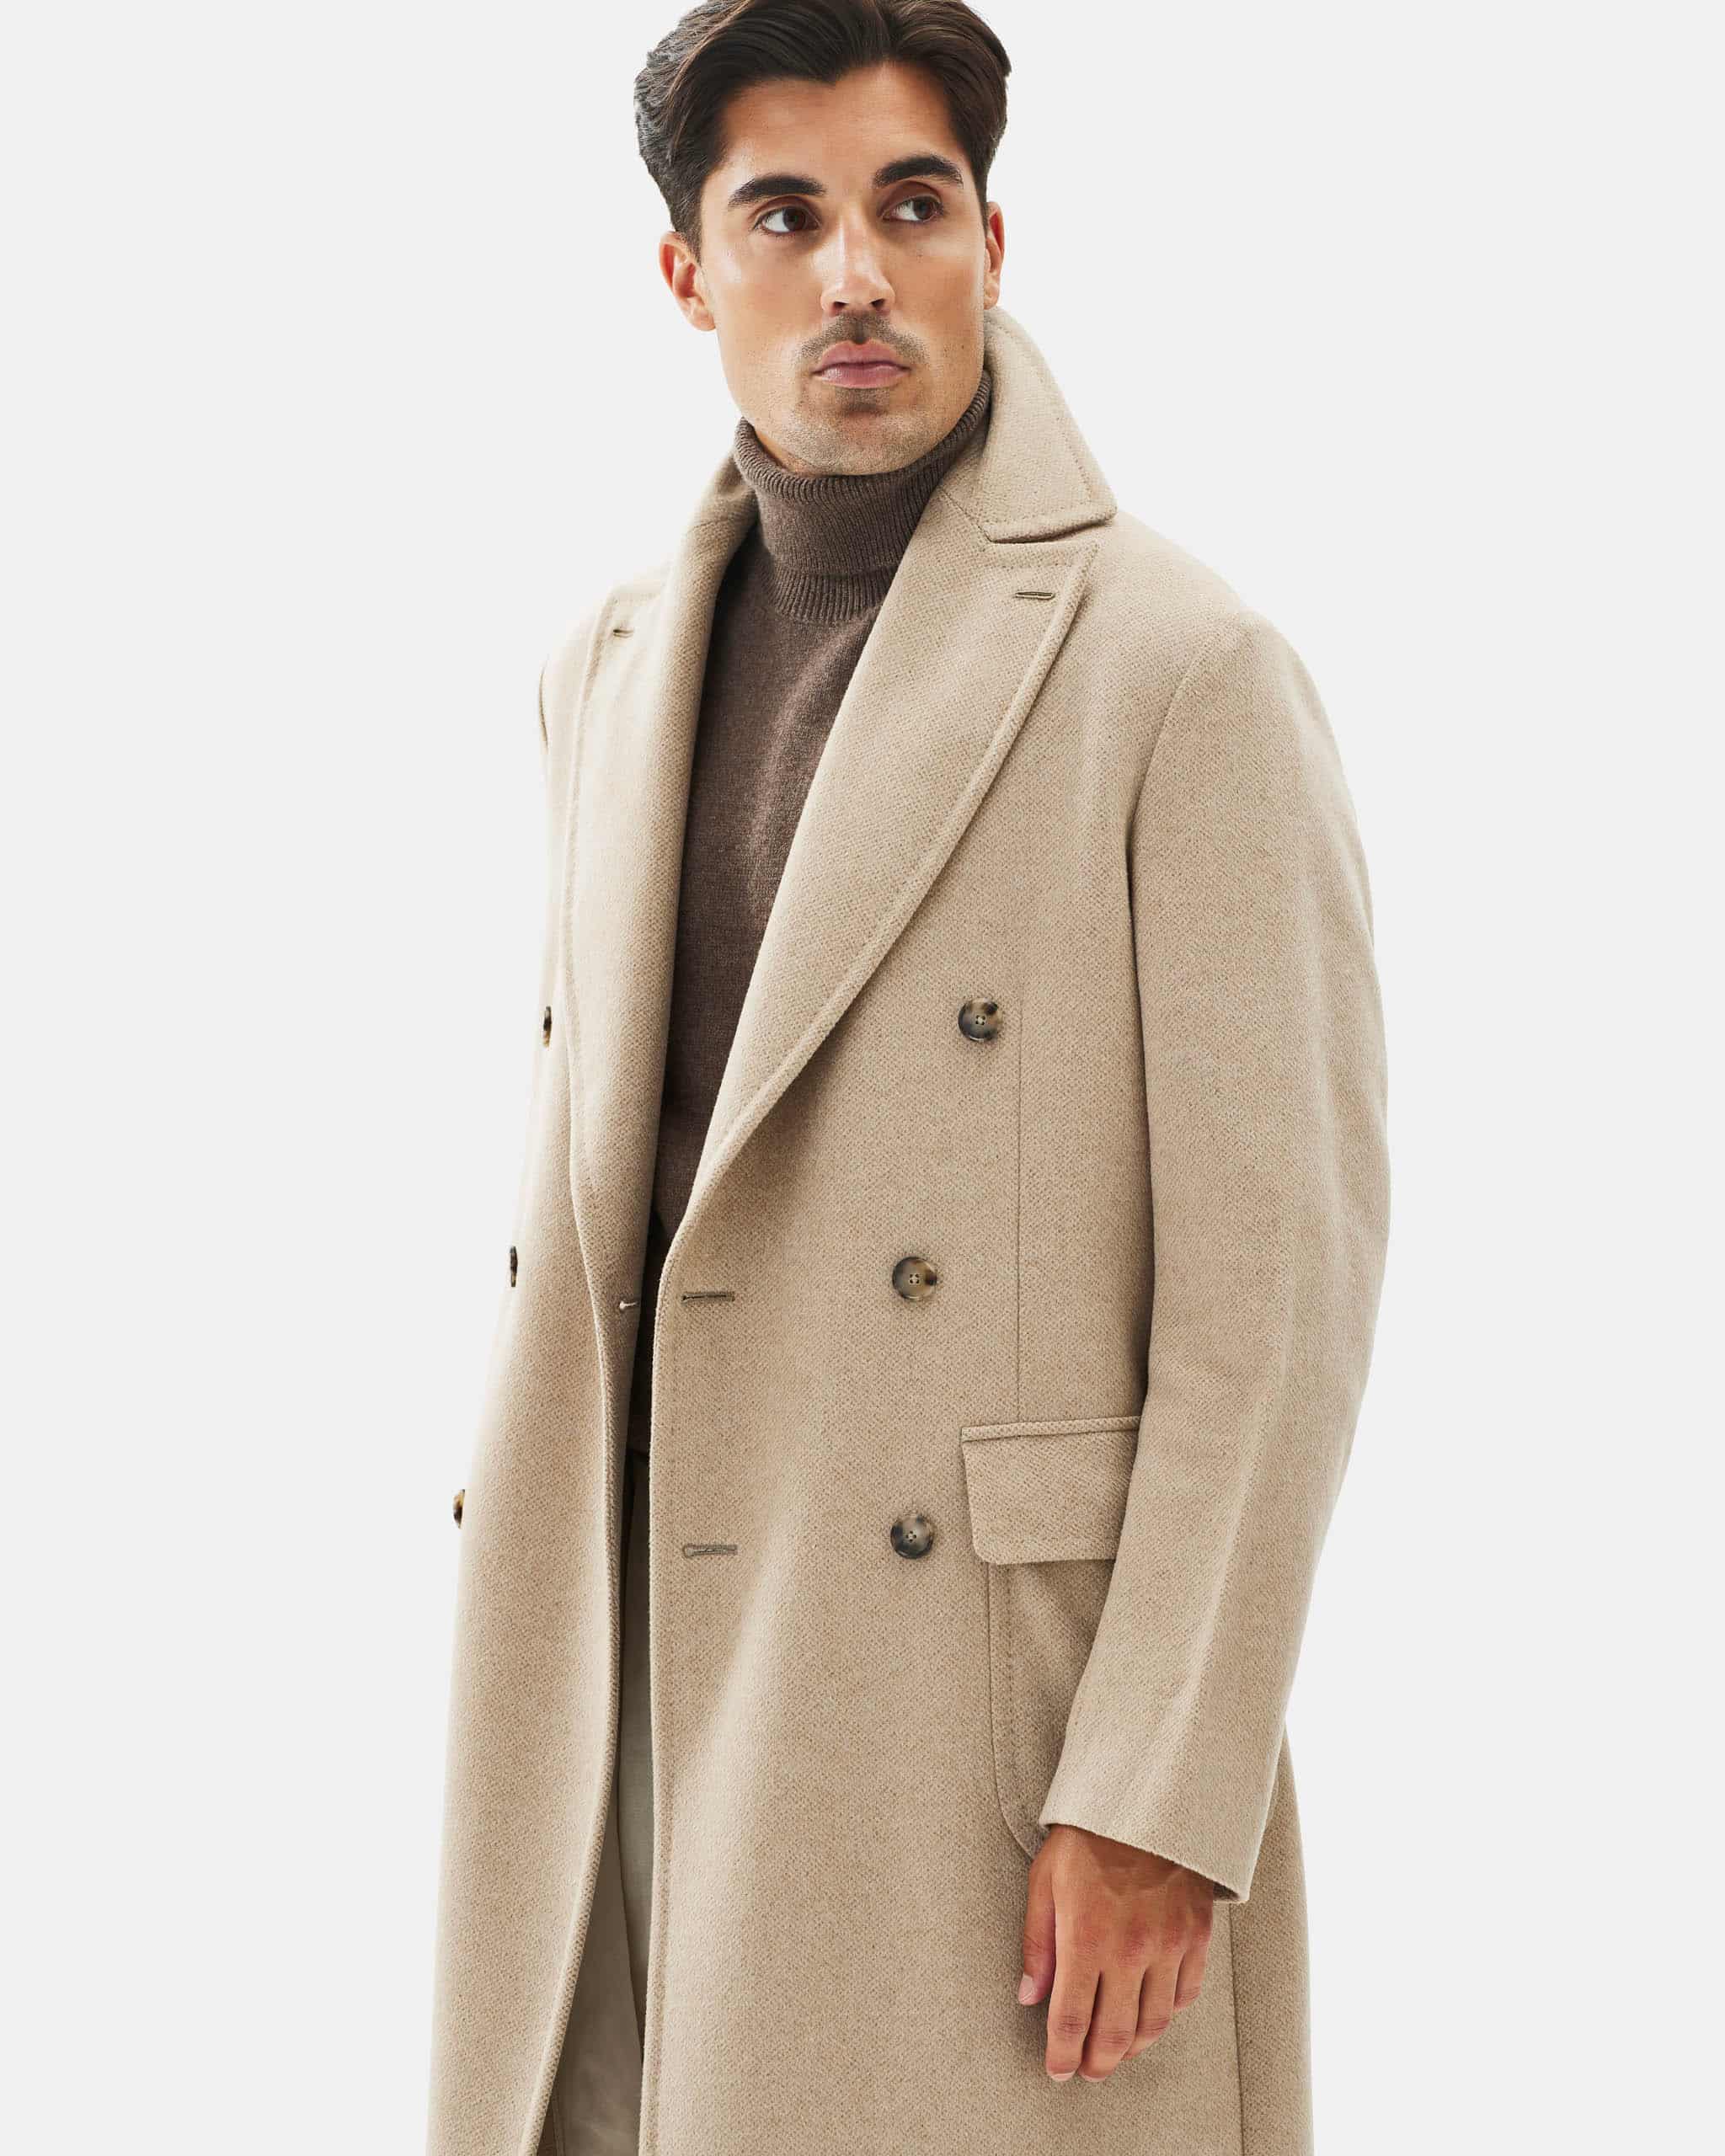 Overcoat wool & cashmere sand image 3